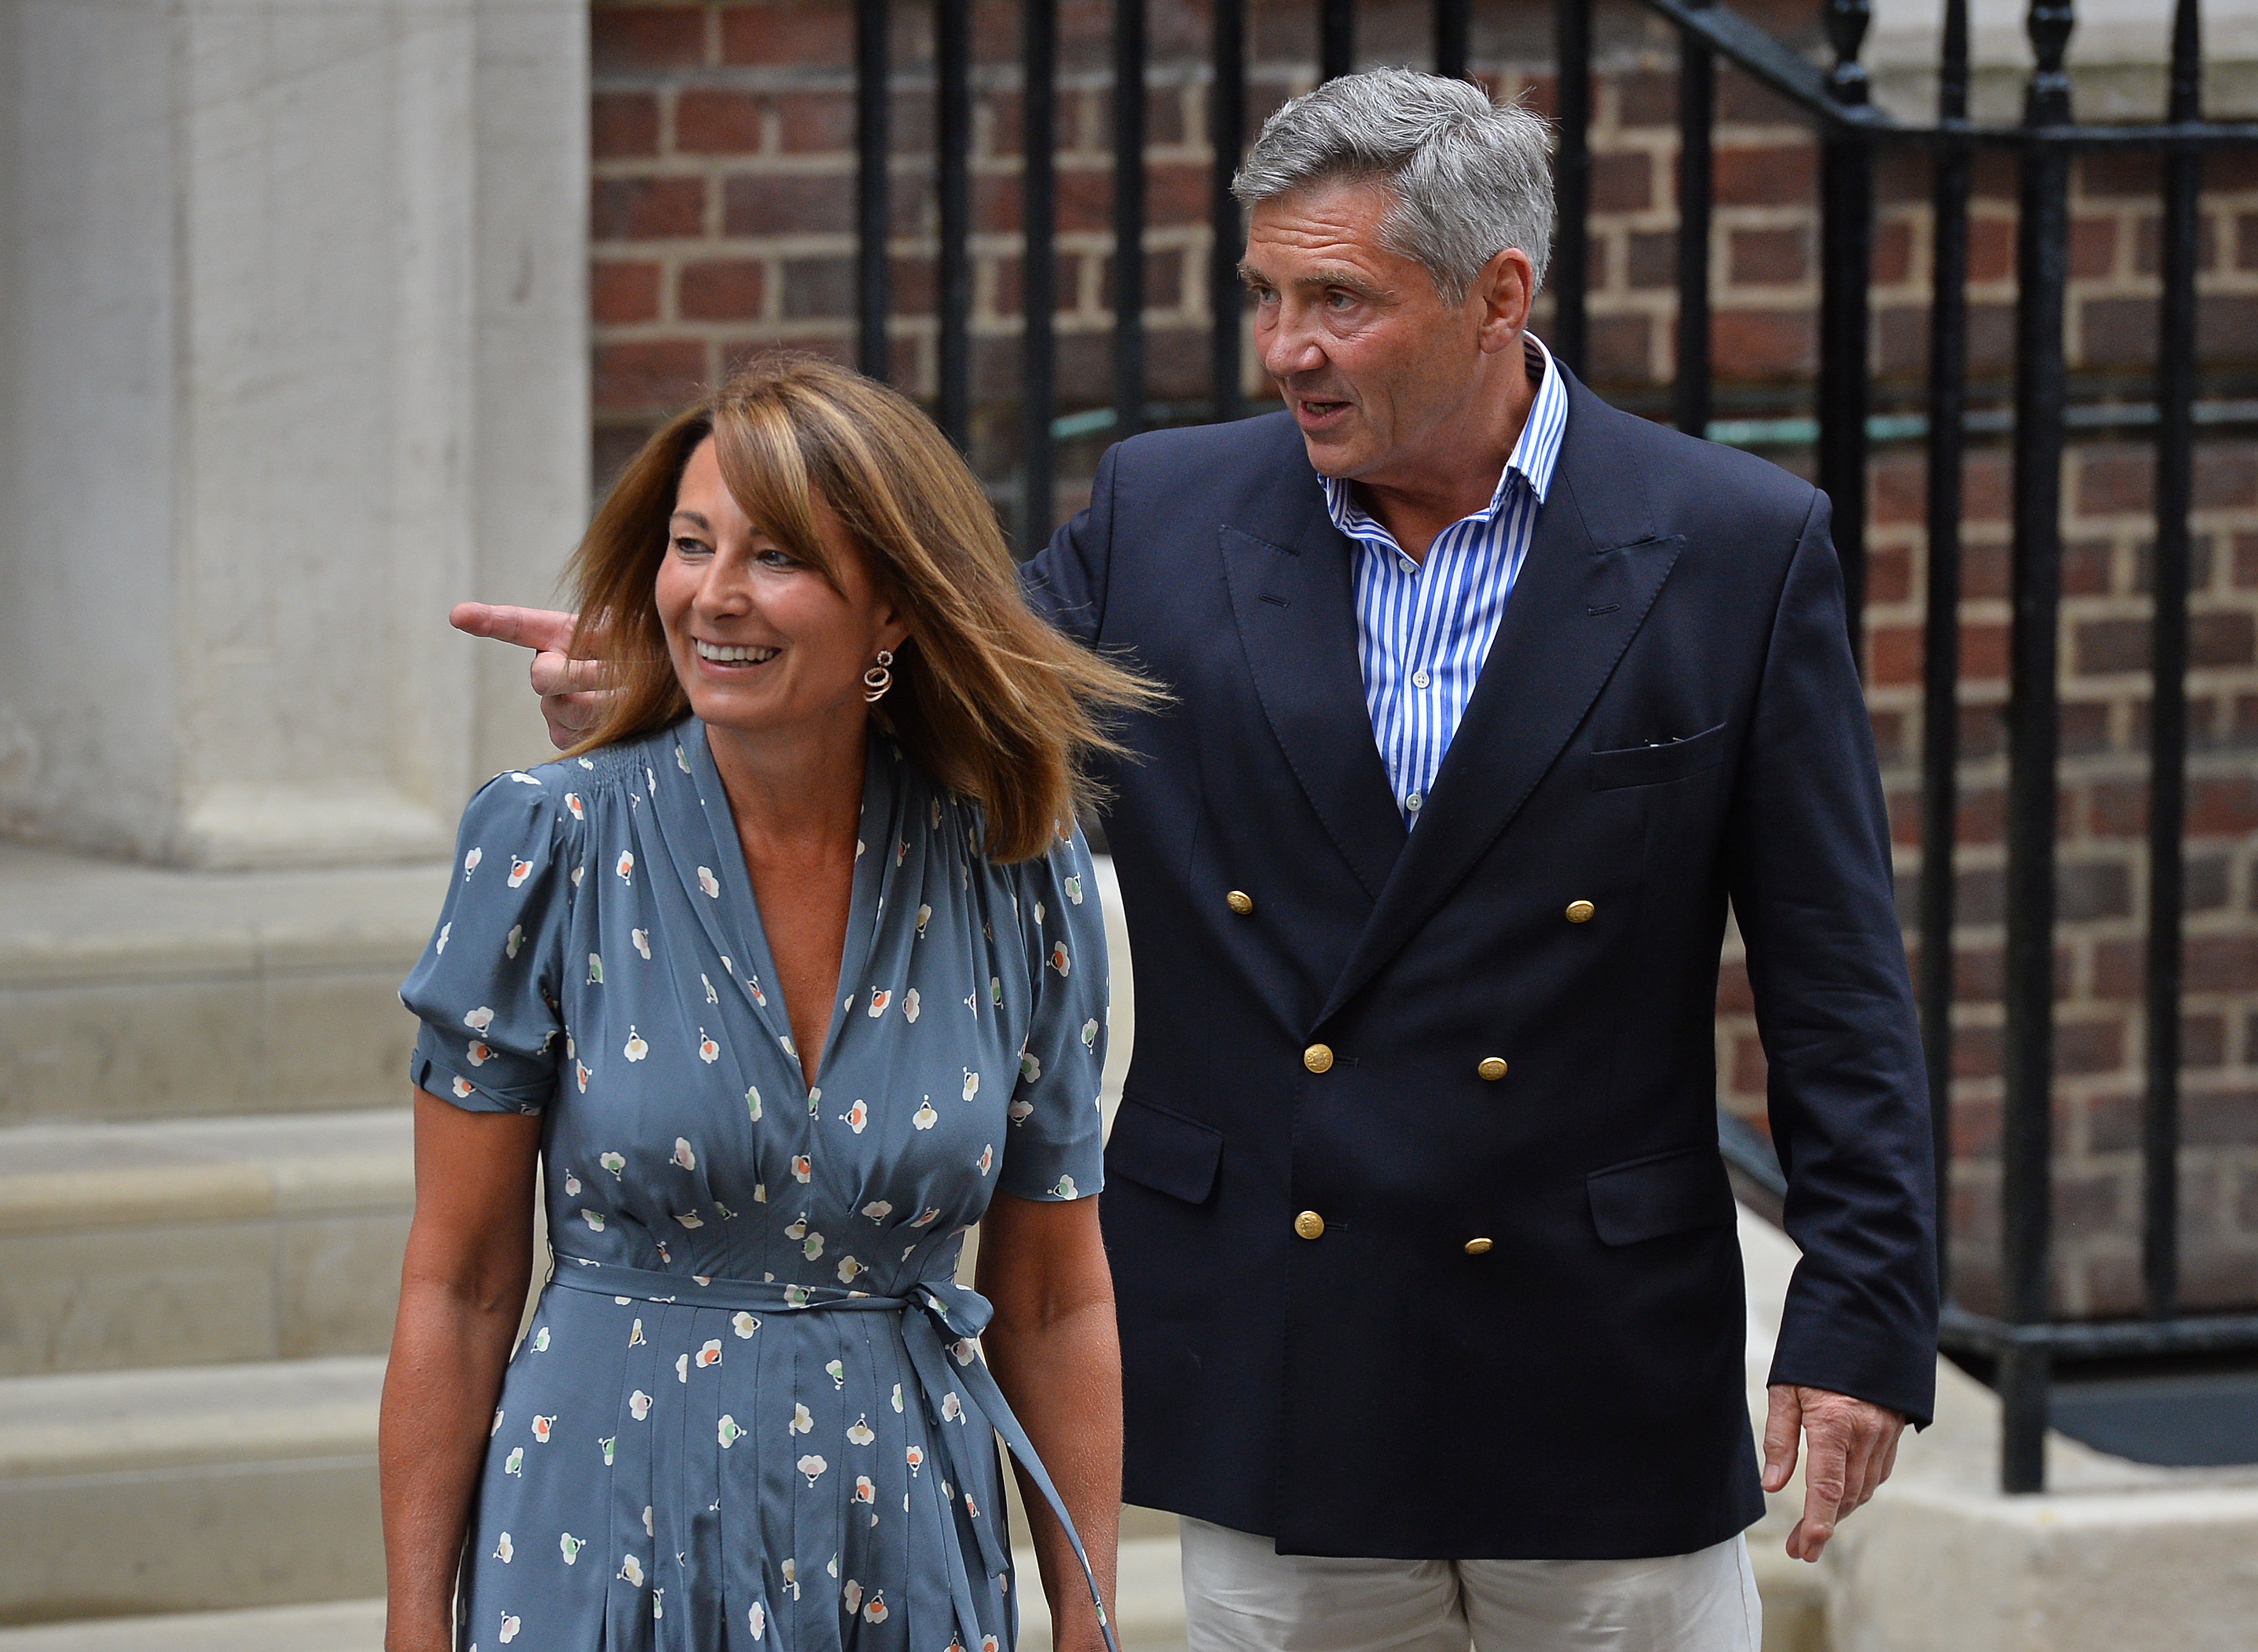 Carole and Michael Middleton leaving the St Mary's Hospital after the Princess of Wales had just given birth in 2013 | Source: Getty Images